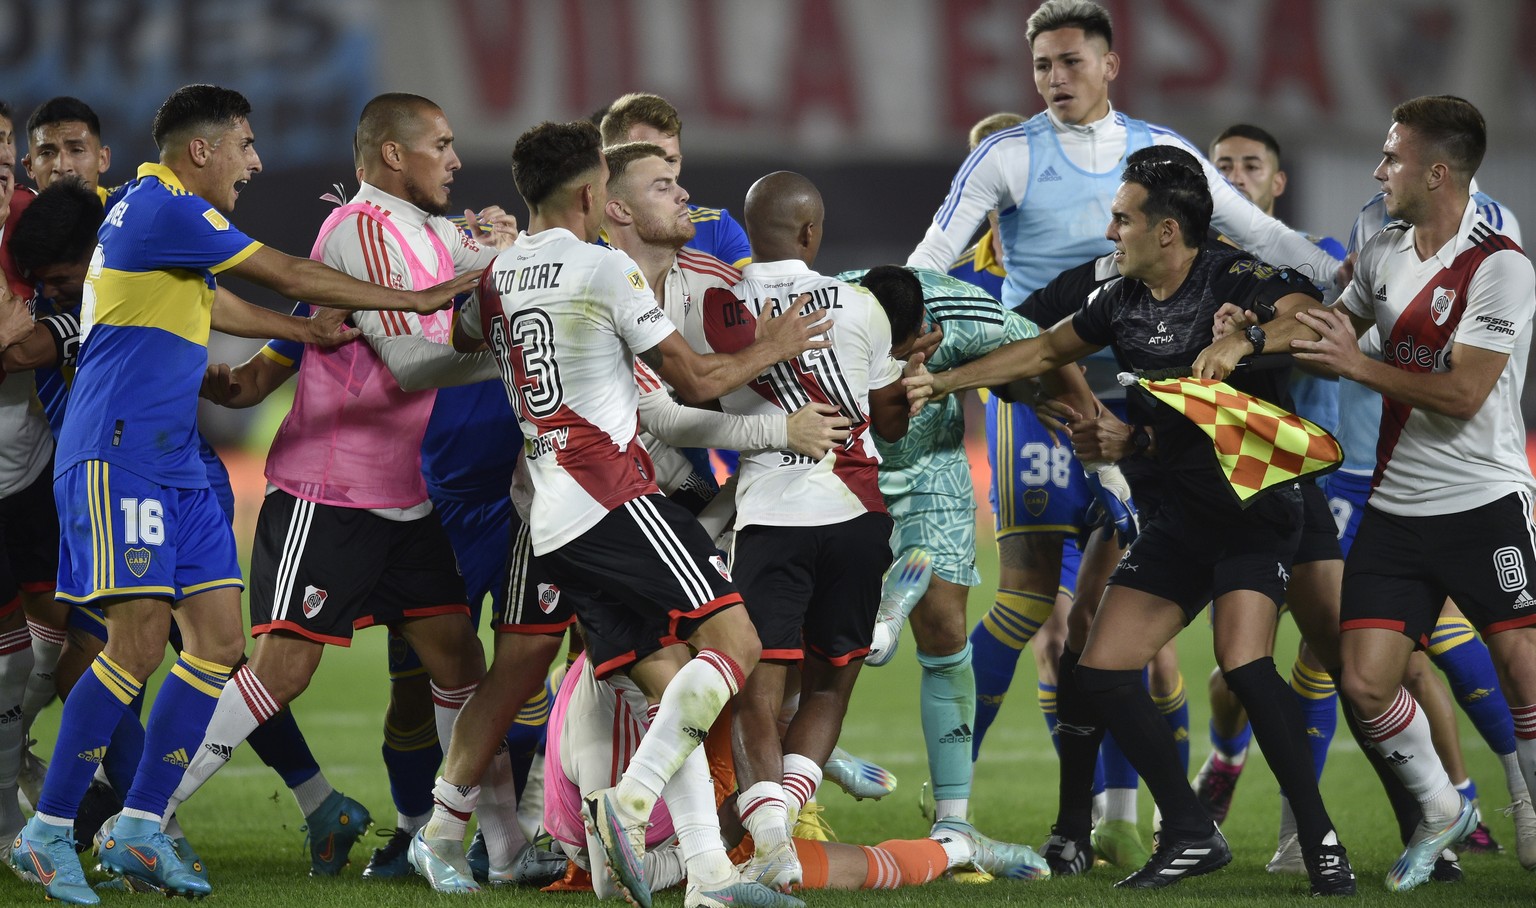 Players of River Plate and Boca Juniors fight during a local tournament soccer match at Monumental stadium in Buenos Aires, Argentina, Sunday, May 7, 2023.(AP Photo/Gustavo Garello)